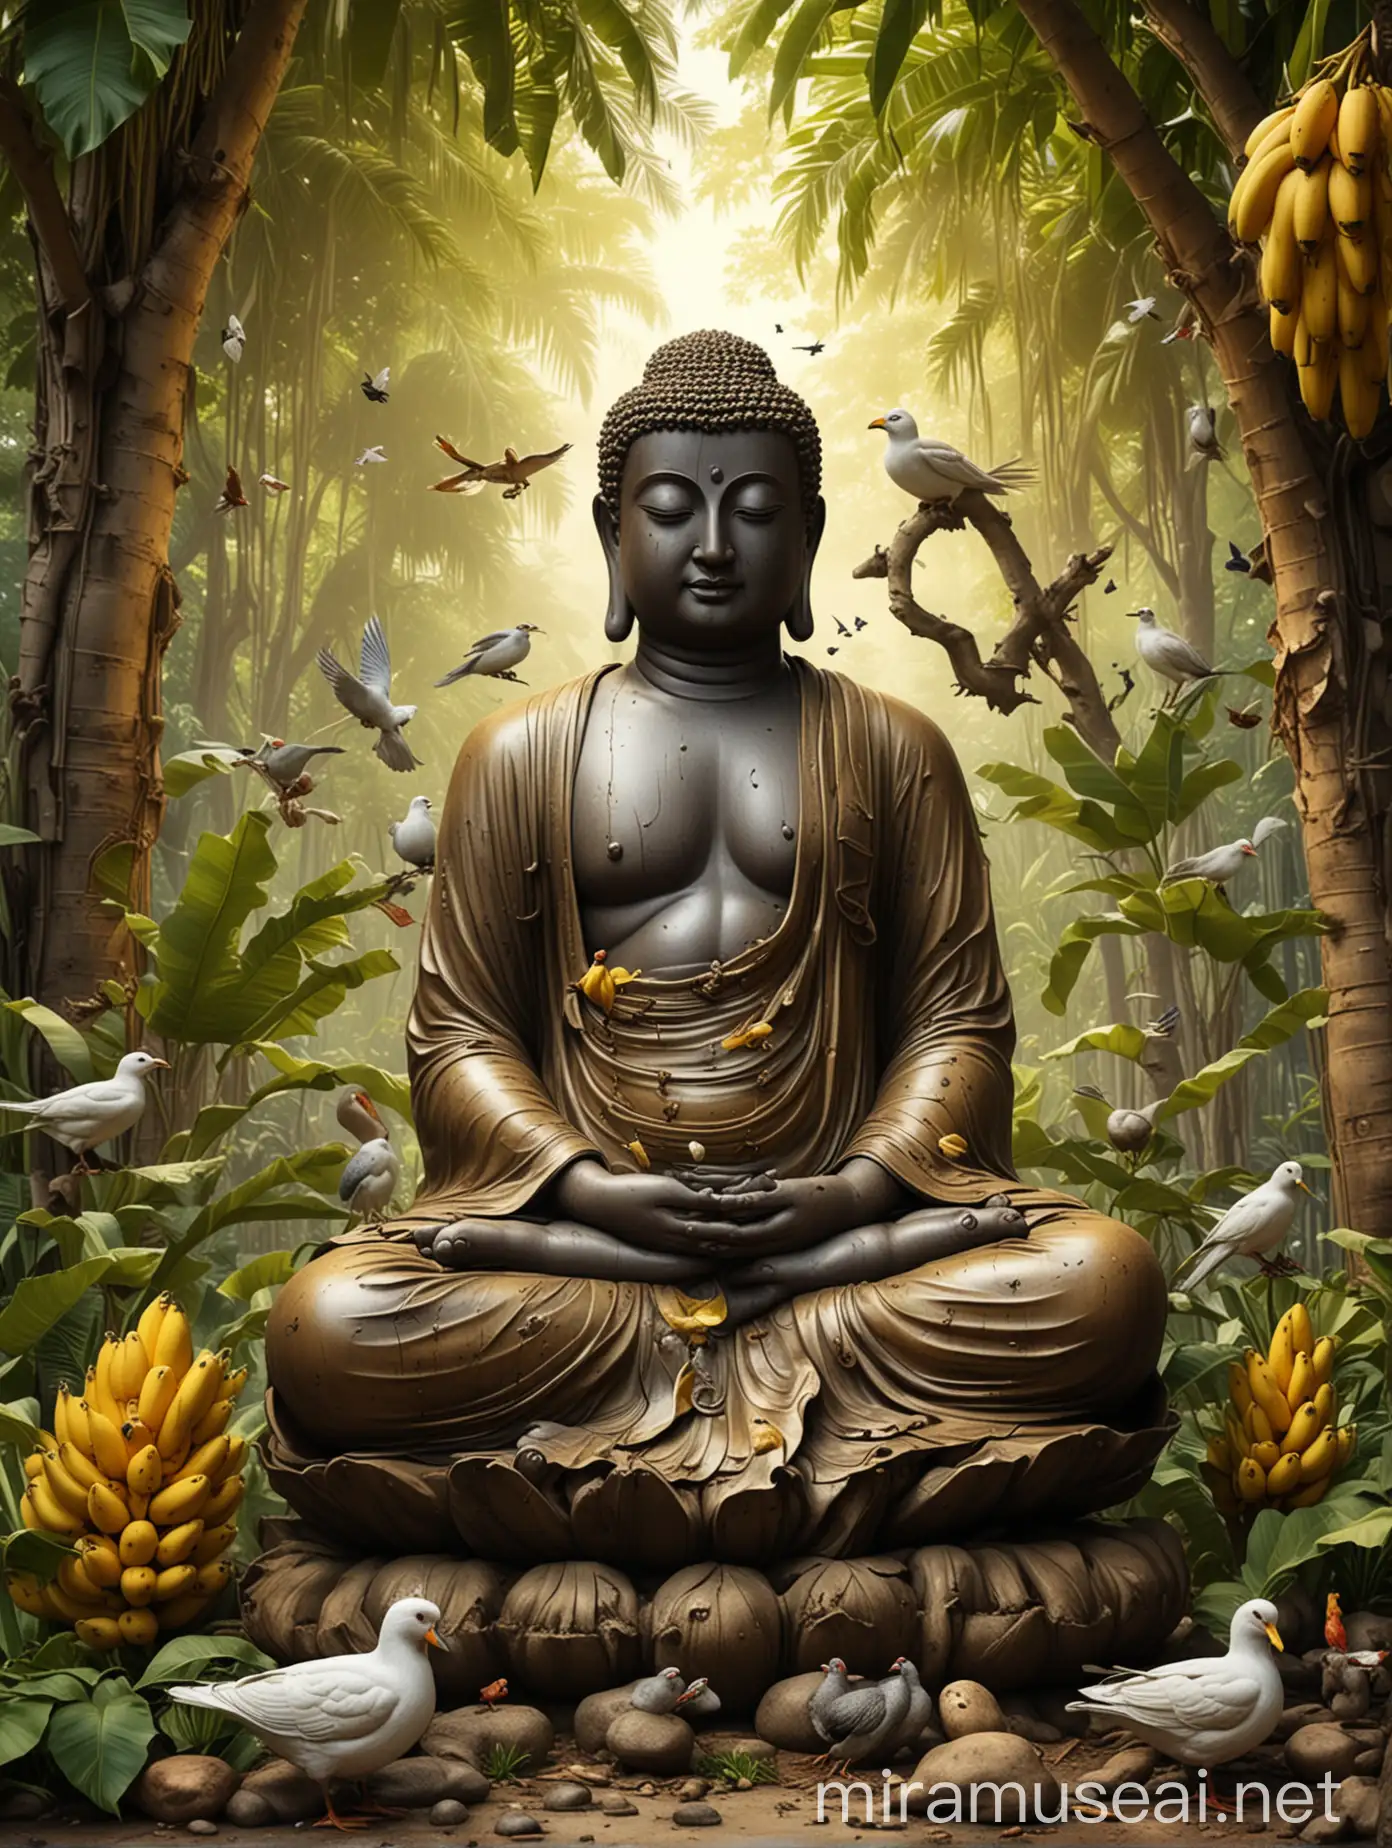 Realistic Buddha Statue Sitting Under Banana Tree Surrounded by Birds and Animals